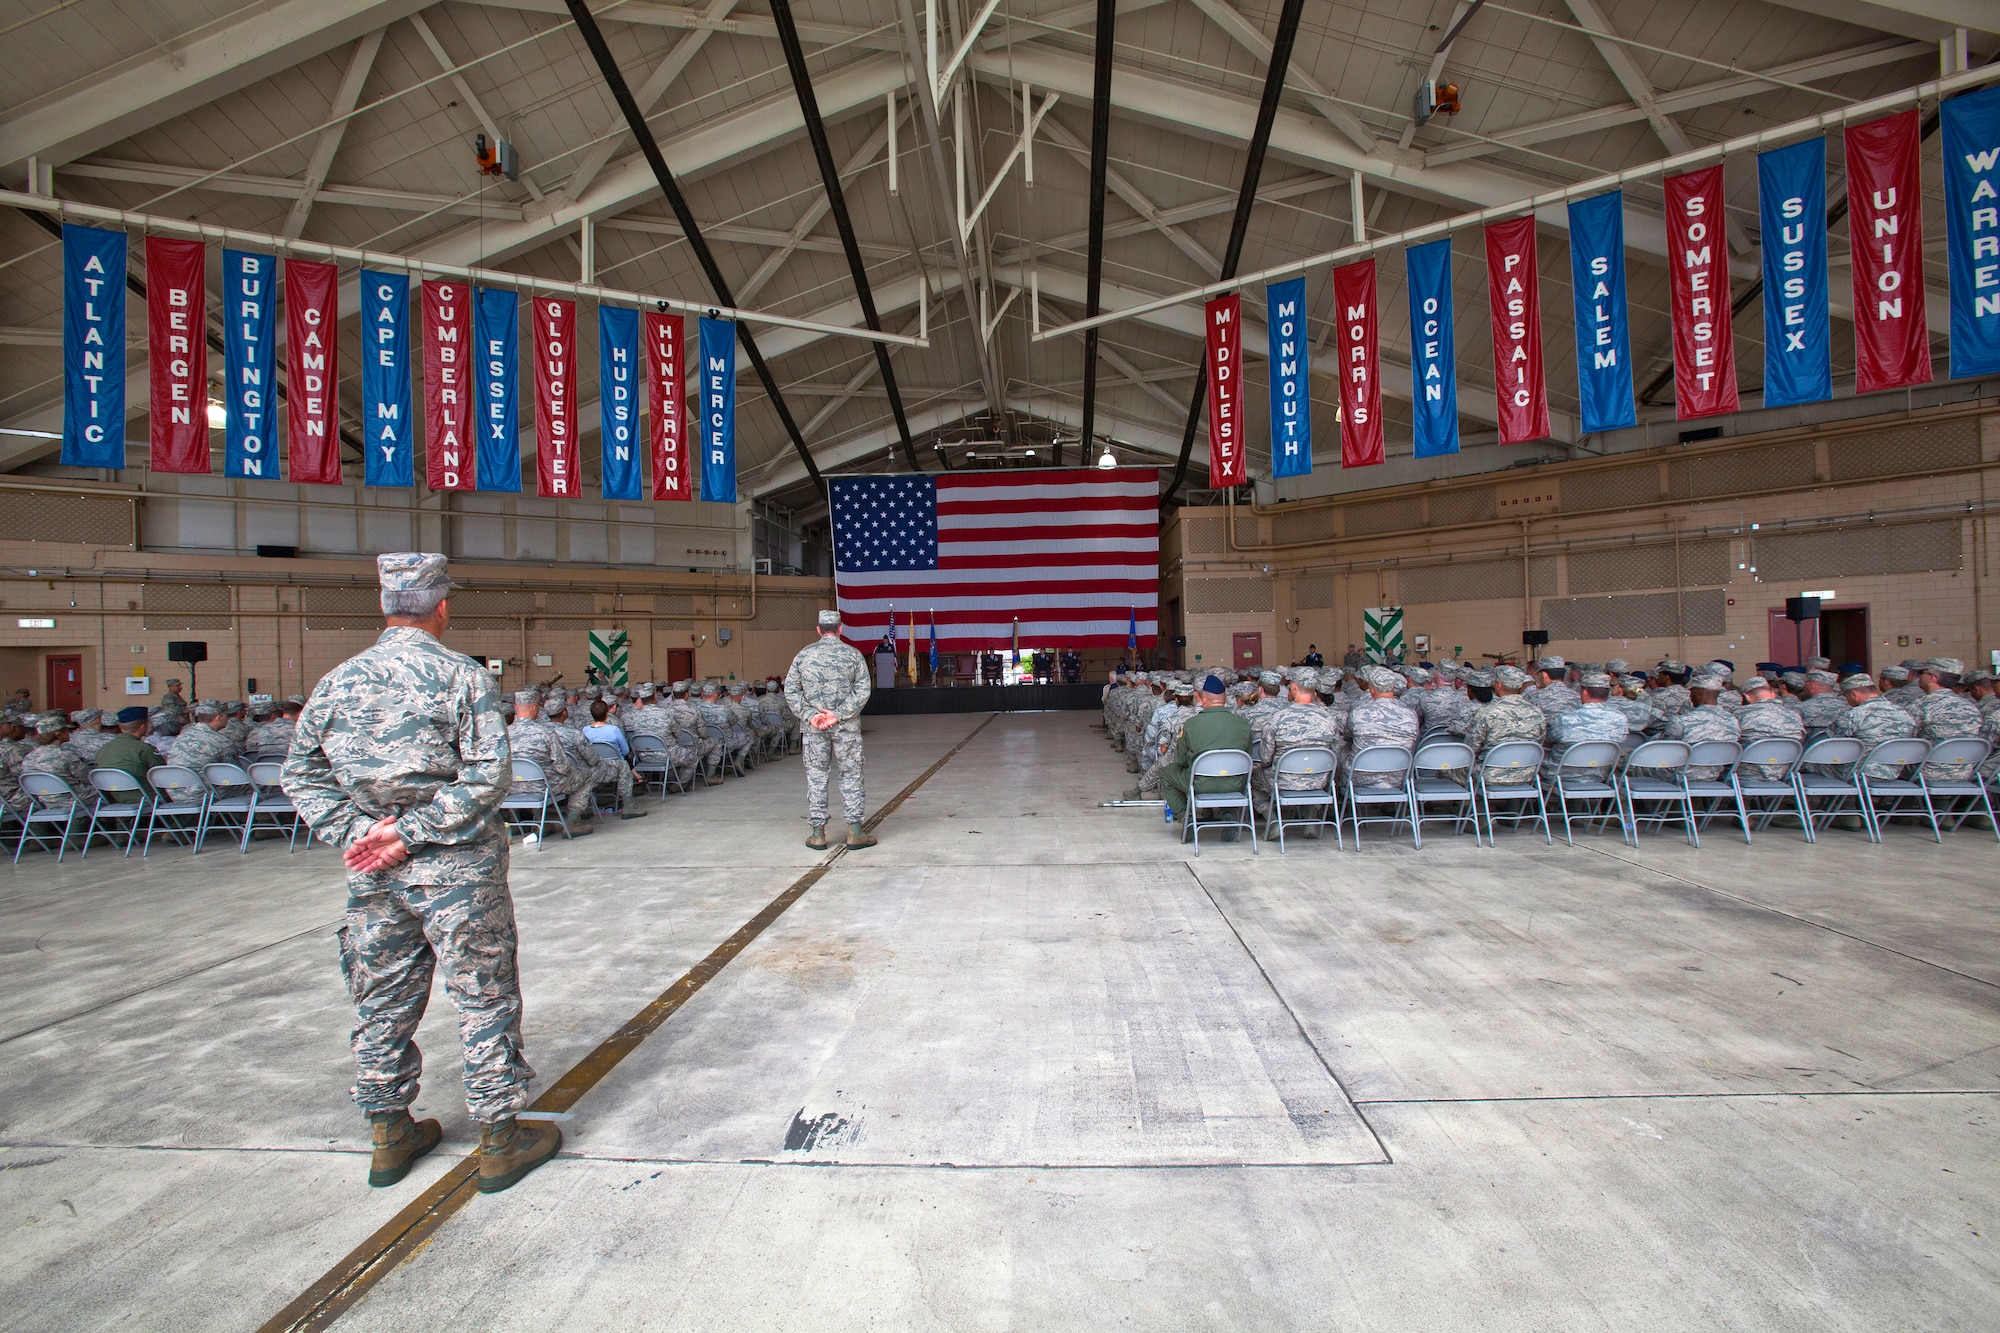 Col. Robert A. Meyer Jr. assumes command of the 108th Wing, New Jersey Air National Guard, from Brig. Gen. Kevin J. Keehn during a Change of Command ceremony at Joint Base McGuire-Dix-Lakehurst, N.J. June 22, 2014.  A change of command ceremony is a military tradition that represents the formal transfer of authority and responsibility for a unit from one commanding or flag officer to another. Since Sept. 11, 2001, the 108th Wing has deployed Airmen around the globe in support of Operation's Iraqi Freedom, Noble Eagle, Enduring Freedom and New Dawn. New Jersey's 21 counties, the homes of the Airmen that serve in the Wing, are represented by the banners hanging from the ceiling. (U.S. Air National Guard photo by Master Sgt. Mark C. Olsen/Released)